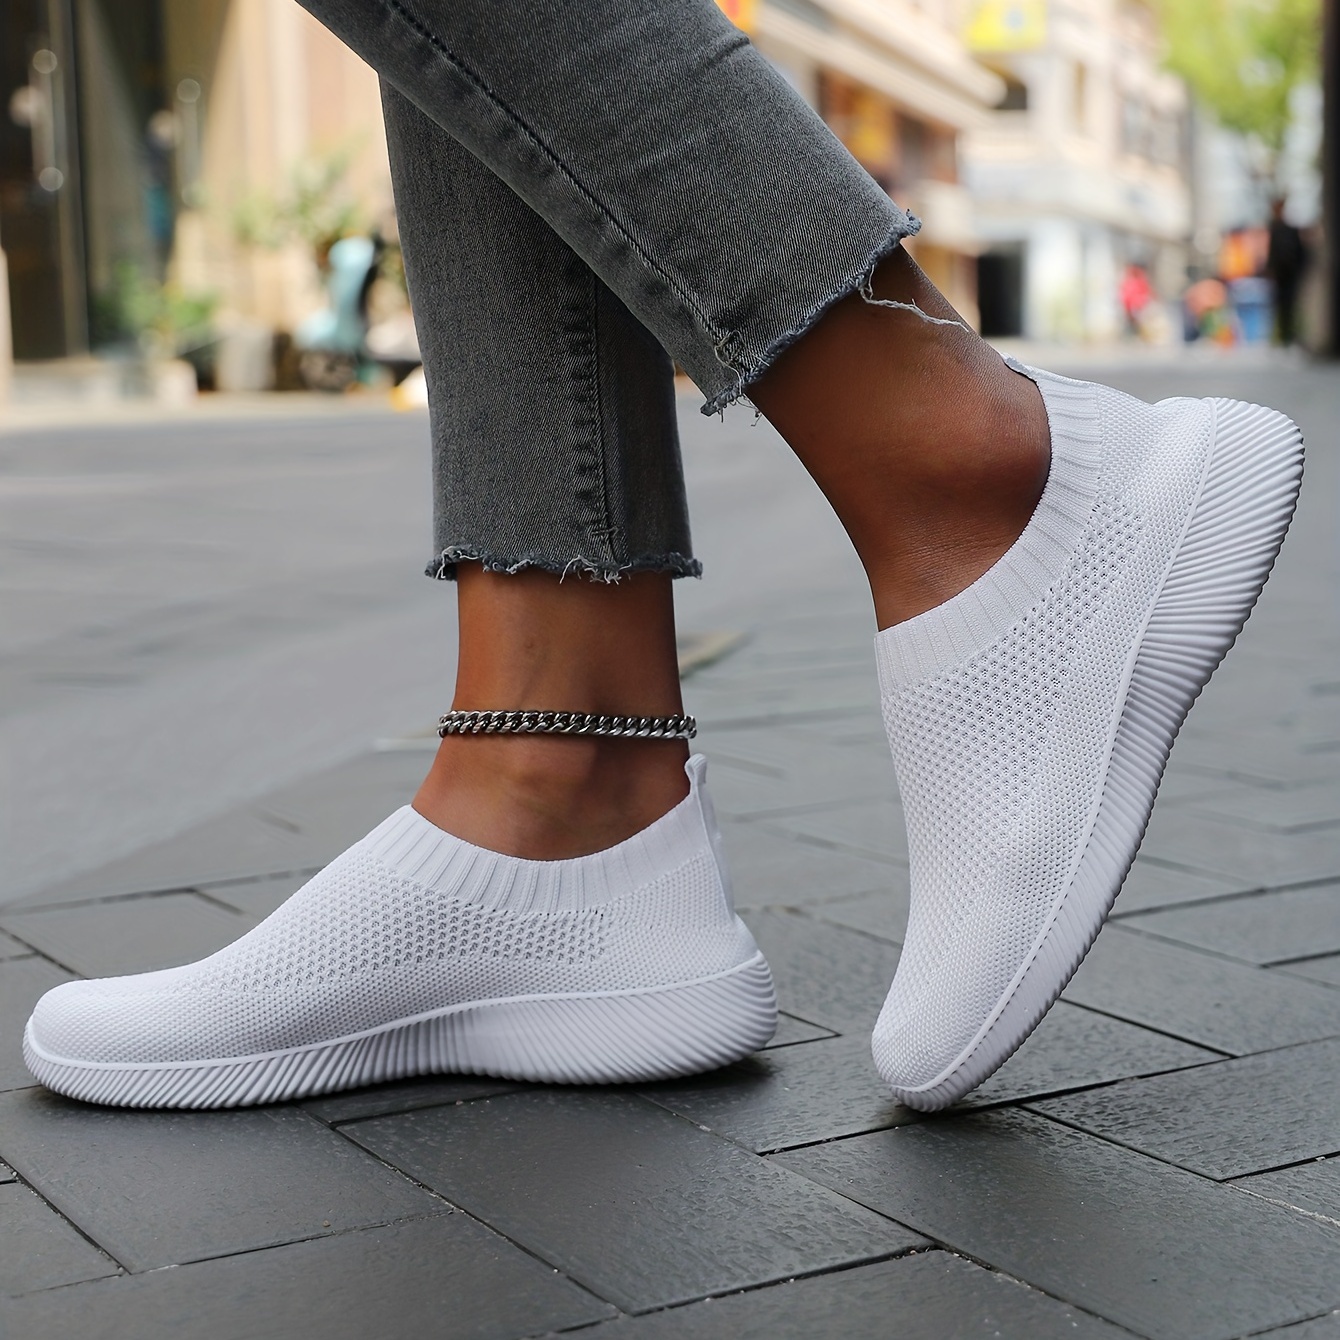 womens solid color flying woven sneakers casual breathable slip on outdoor shoes lightweight low top running shoes details 5